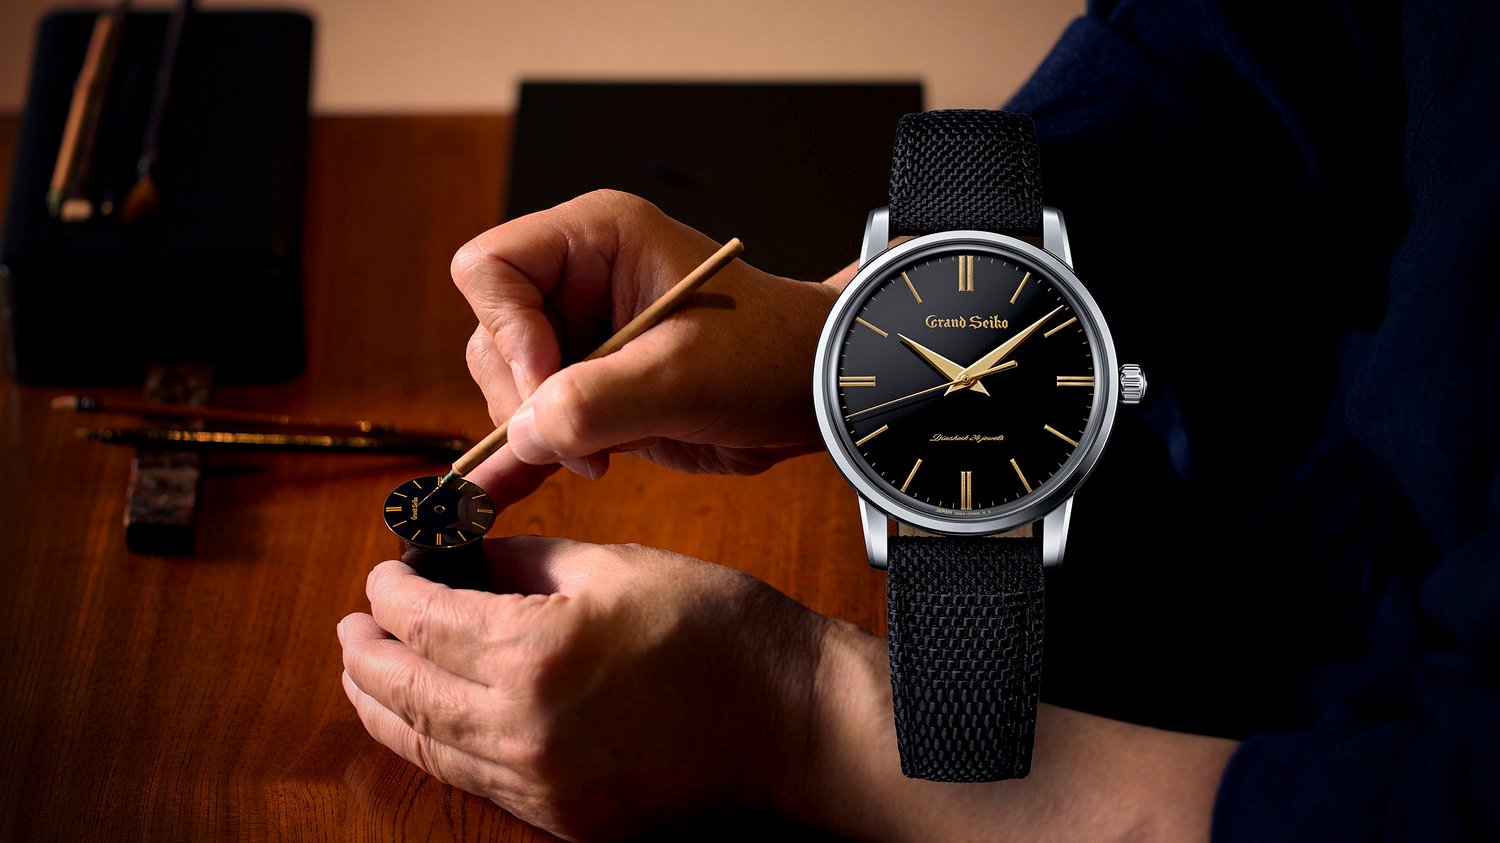 6 watches exemplifying Japan's urushi lacquerware technique: from Seiko's  Presage Kanazawa limited edition and Bulgari's Diva Finissima Minute  Repeater, to Chopard's zodiac-inspired L. U. C XP | South China Morning Post